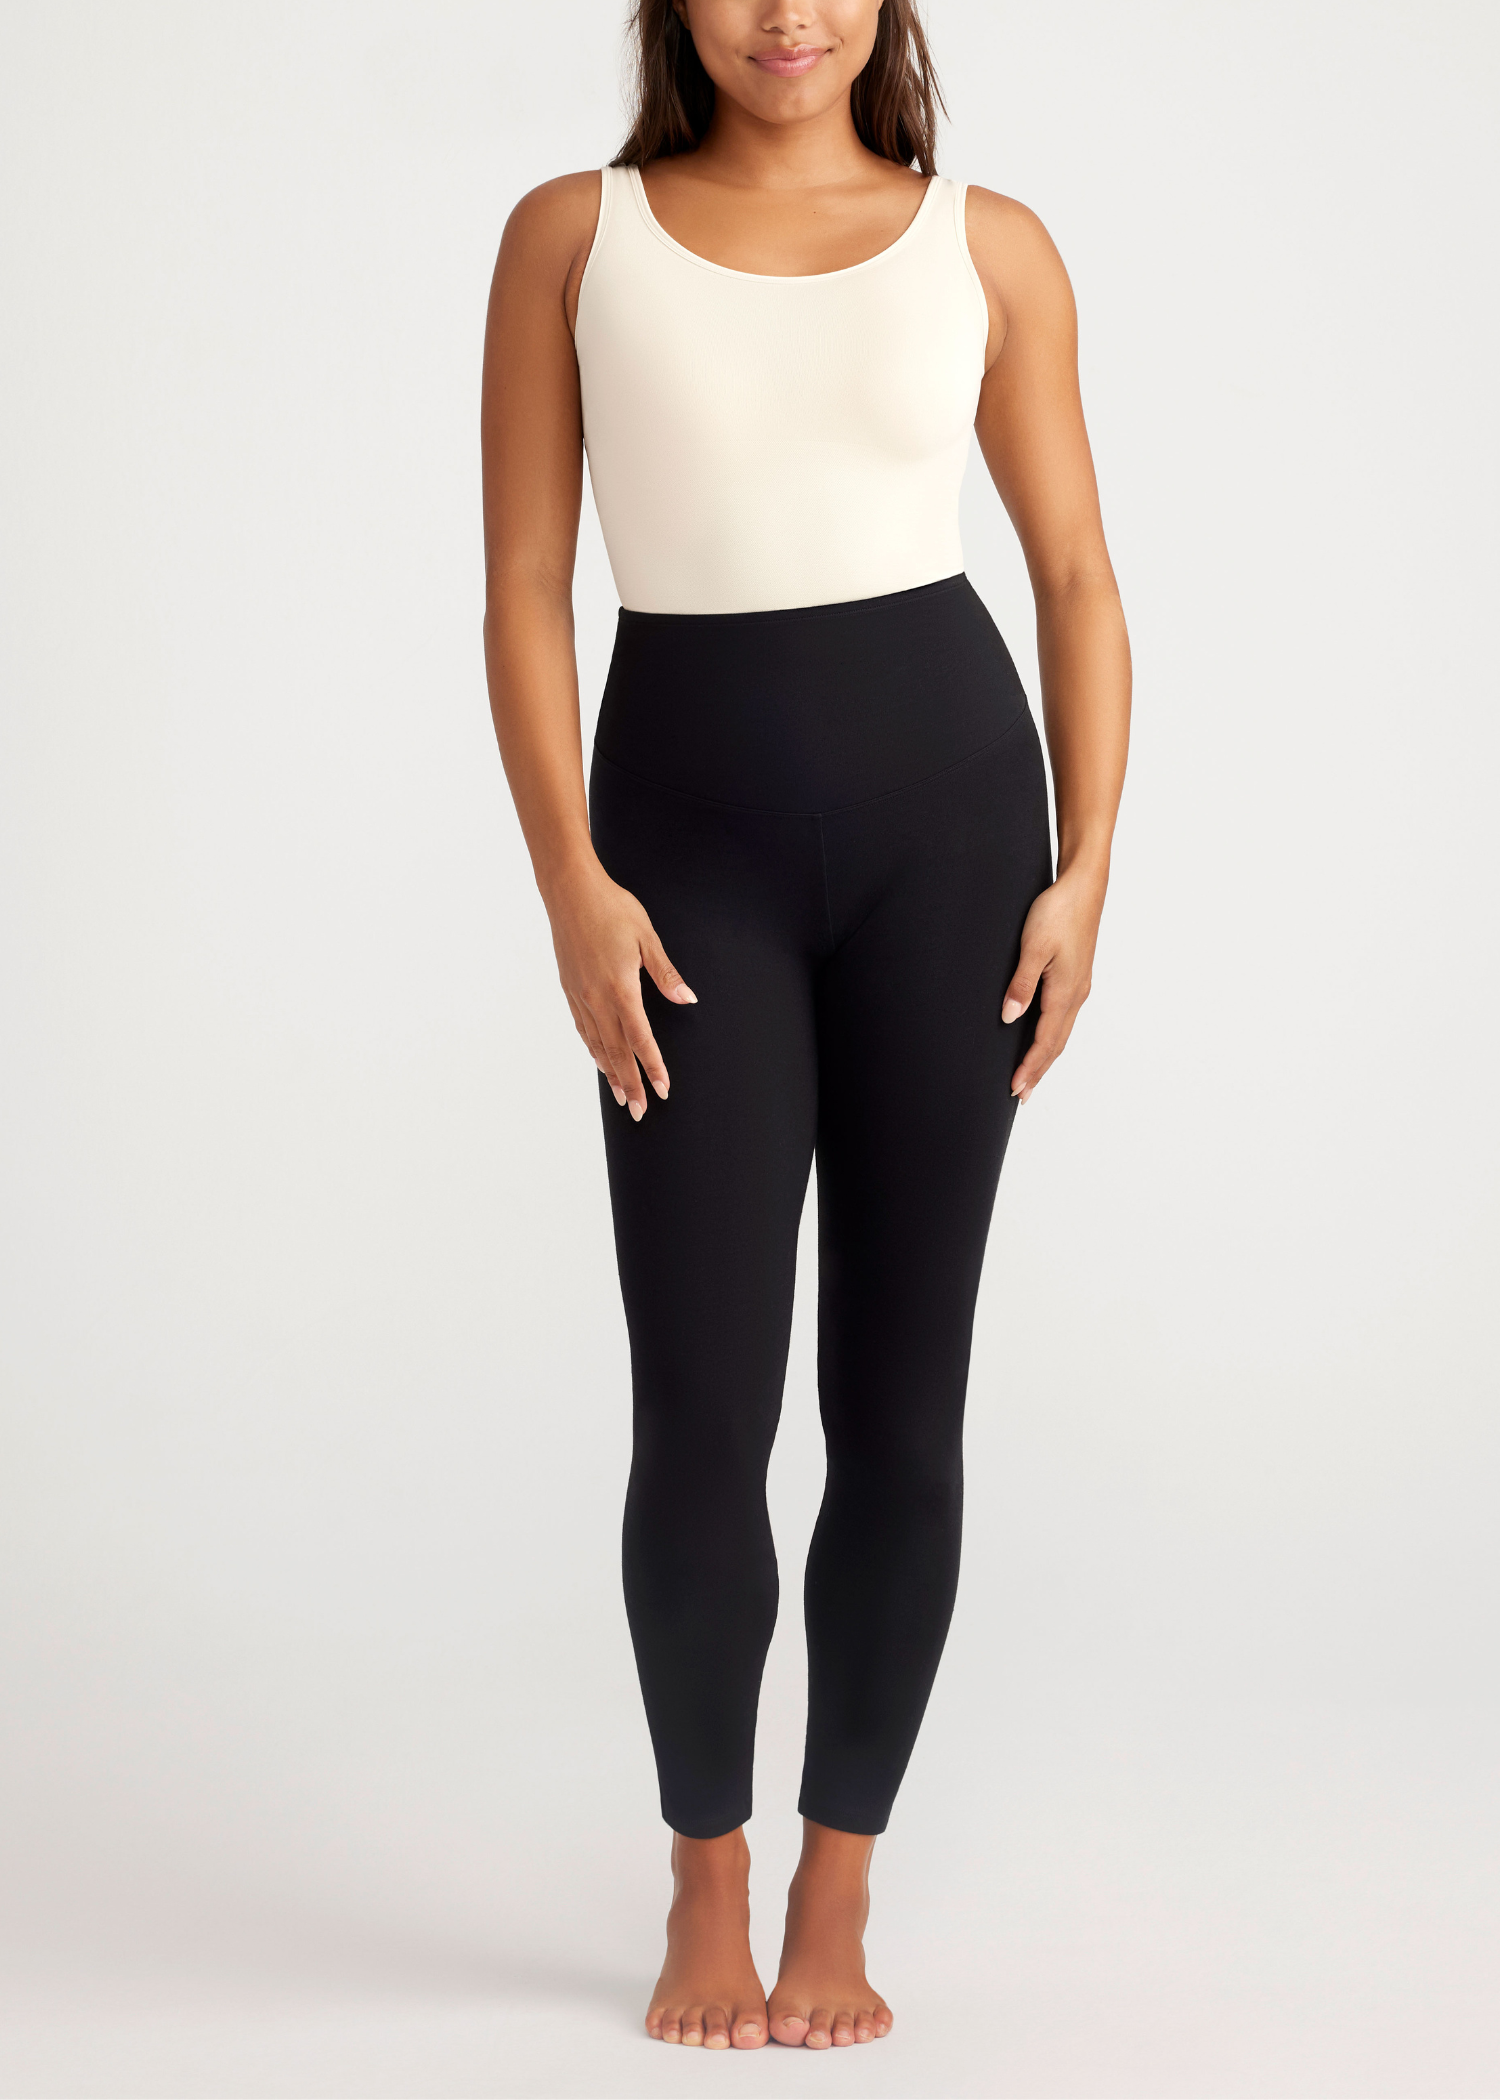 Yummie Tummie Leggings: A $76 Surgery-Free Solution for Shapely Butt & Legs  - FashionTribes.com